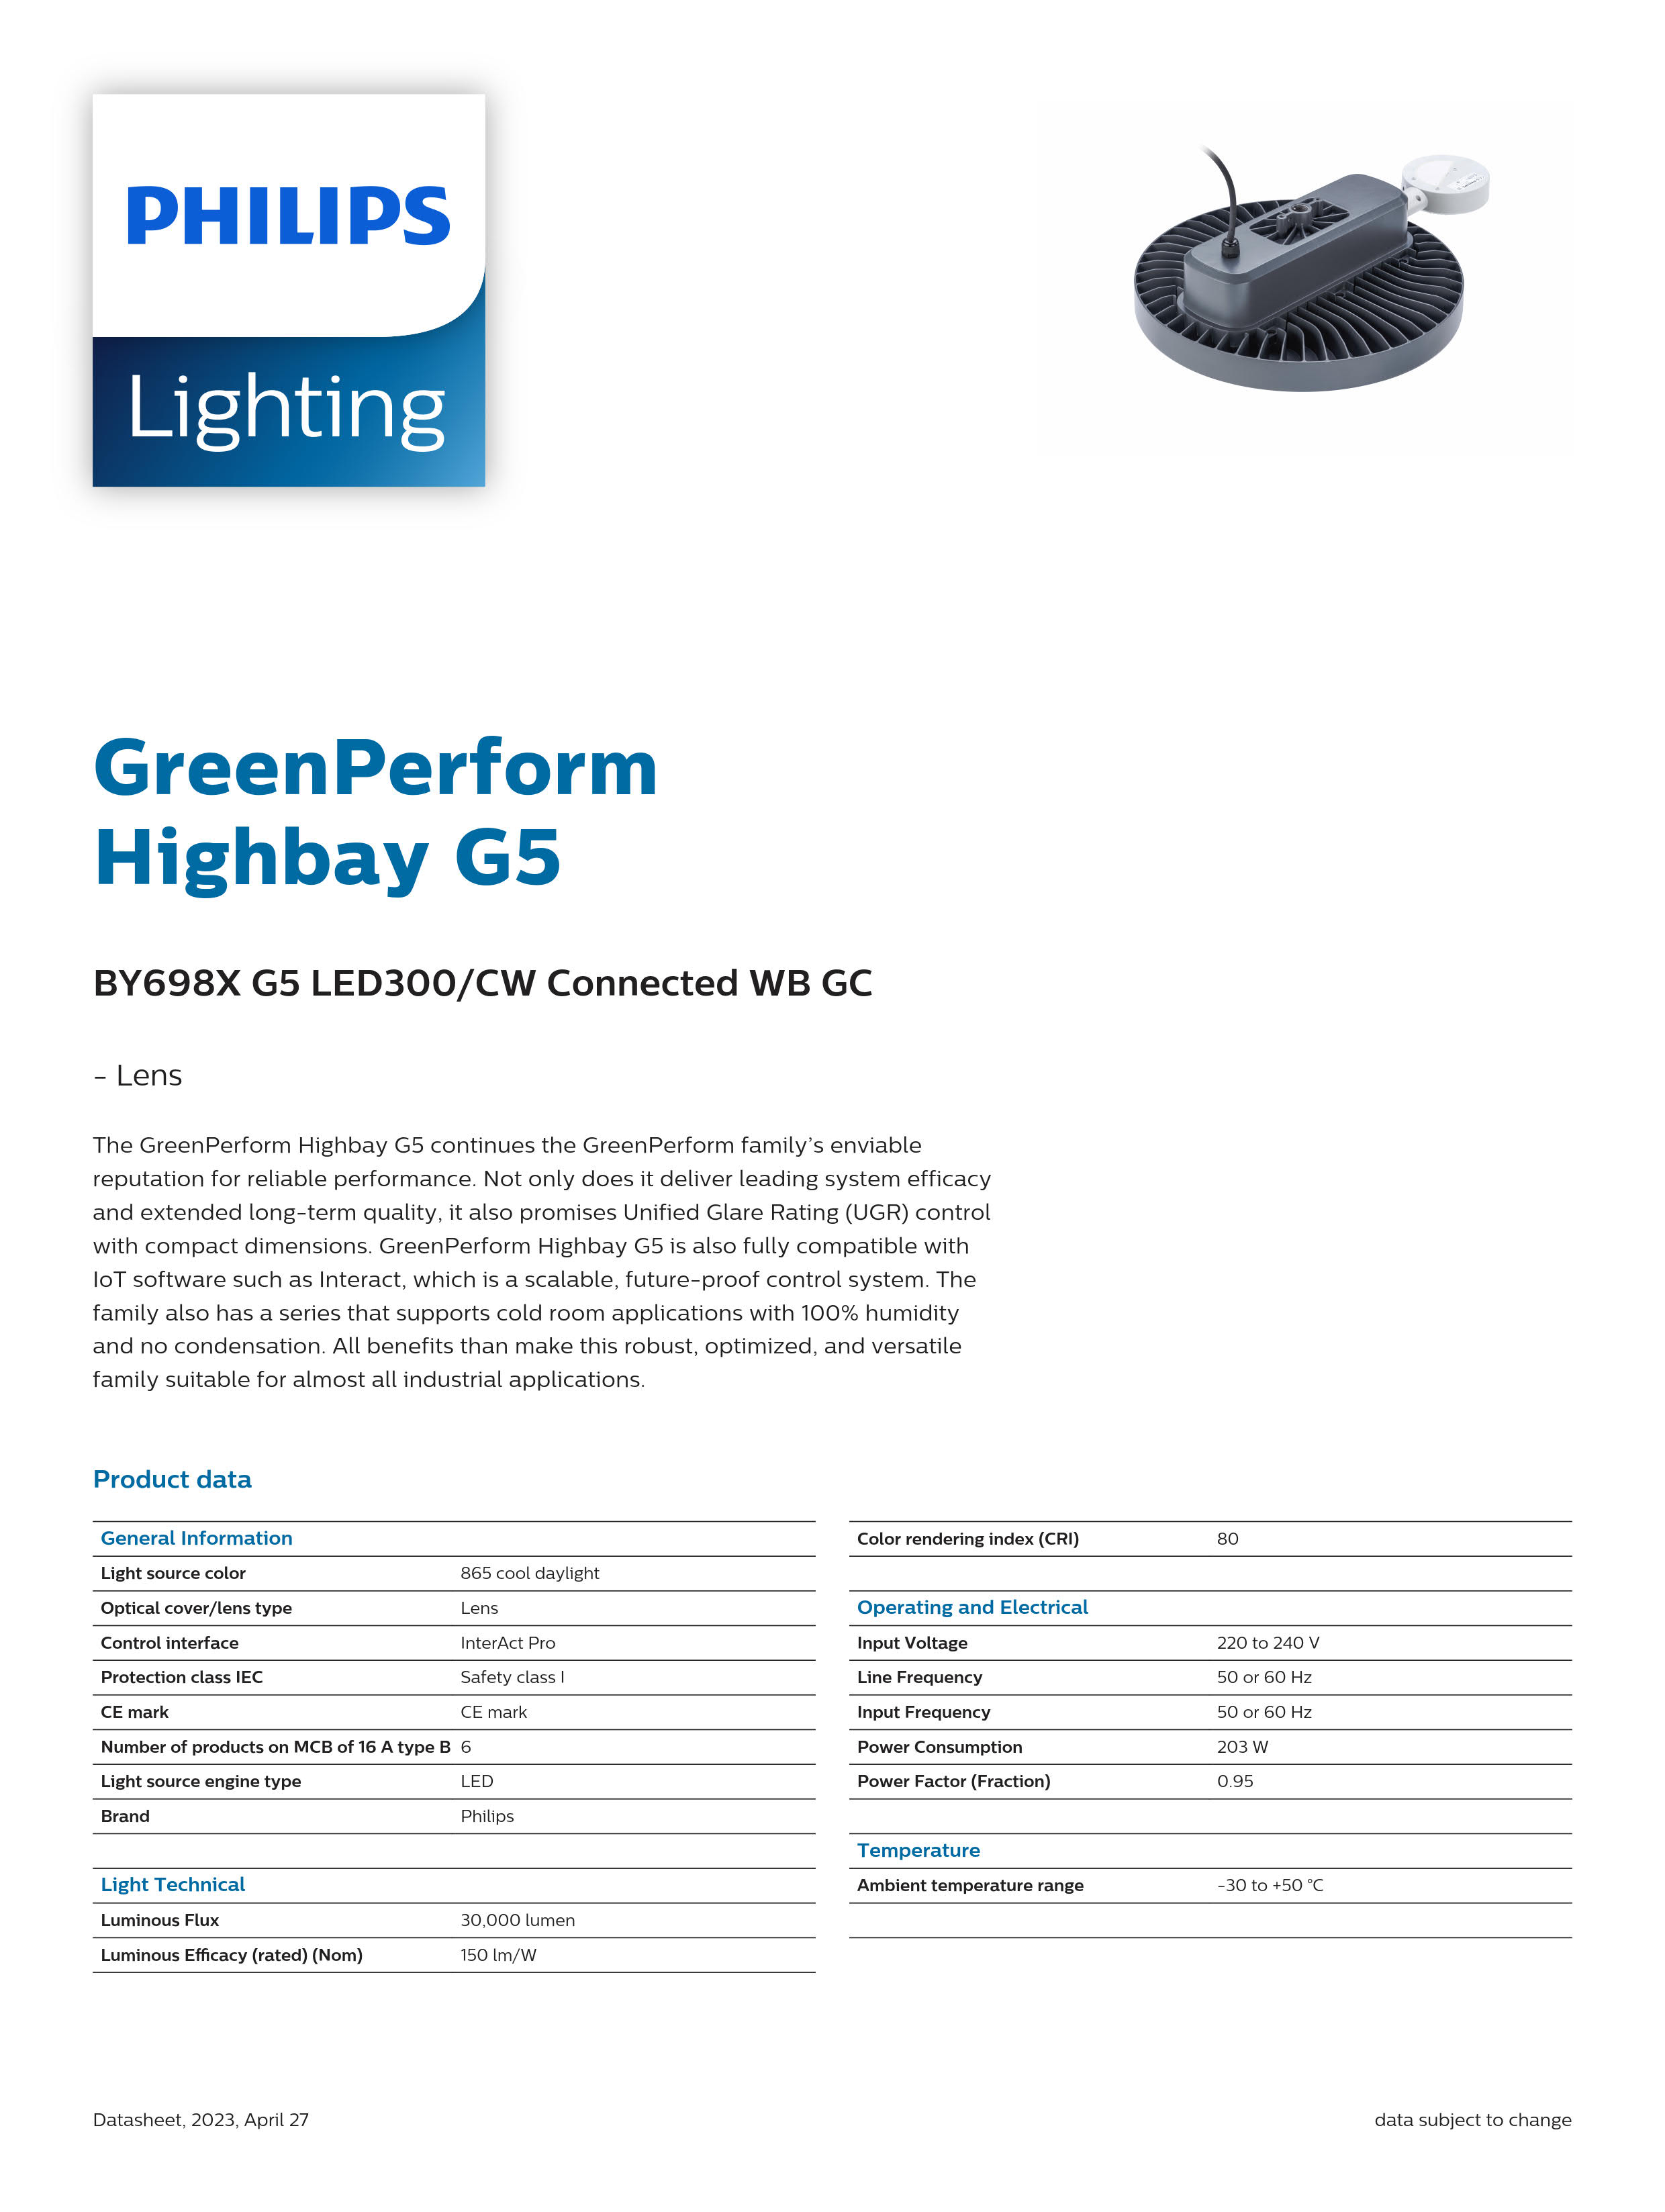 PHILIPS Highbay BY698X G5 LED300/CW Connected WB GC 911401525391